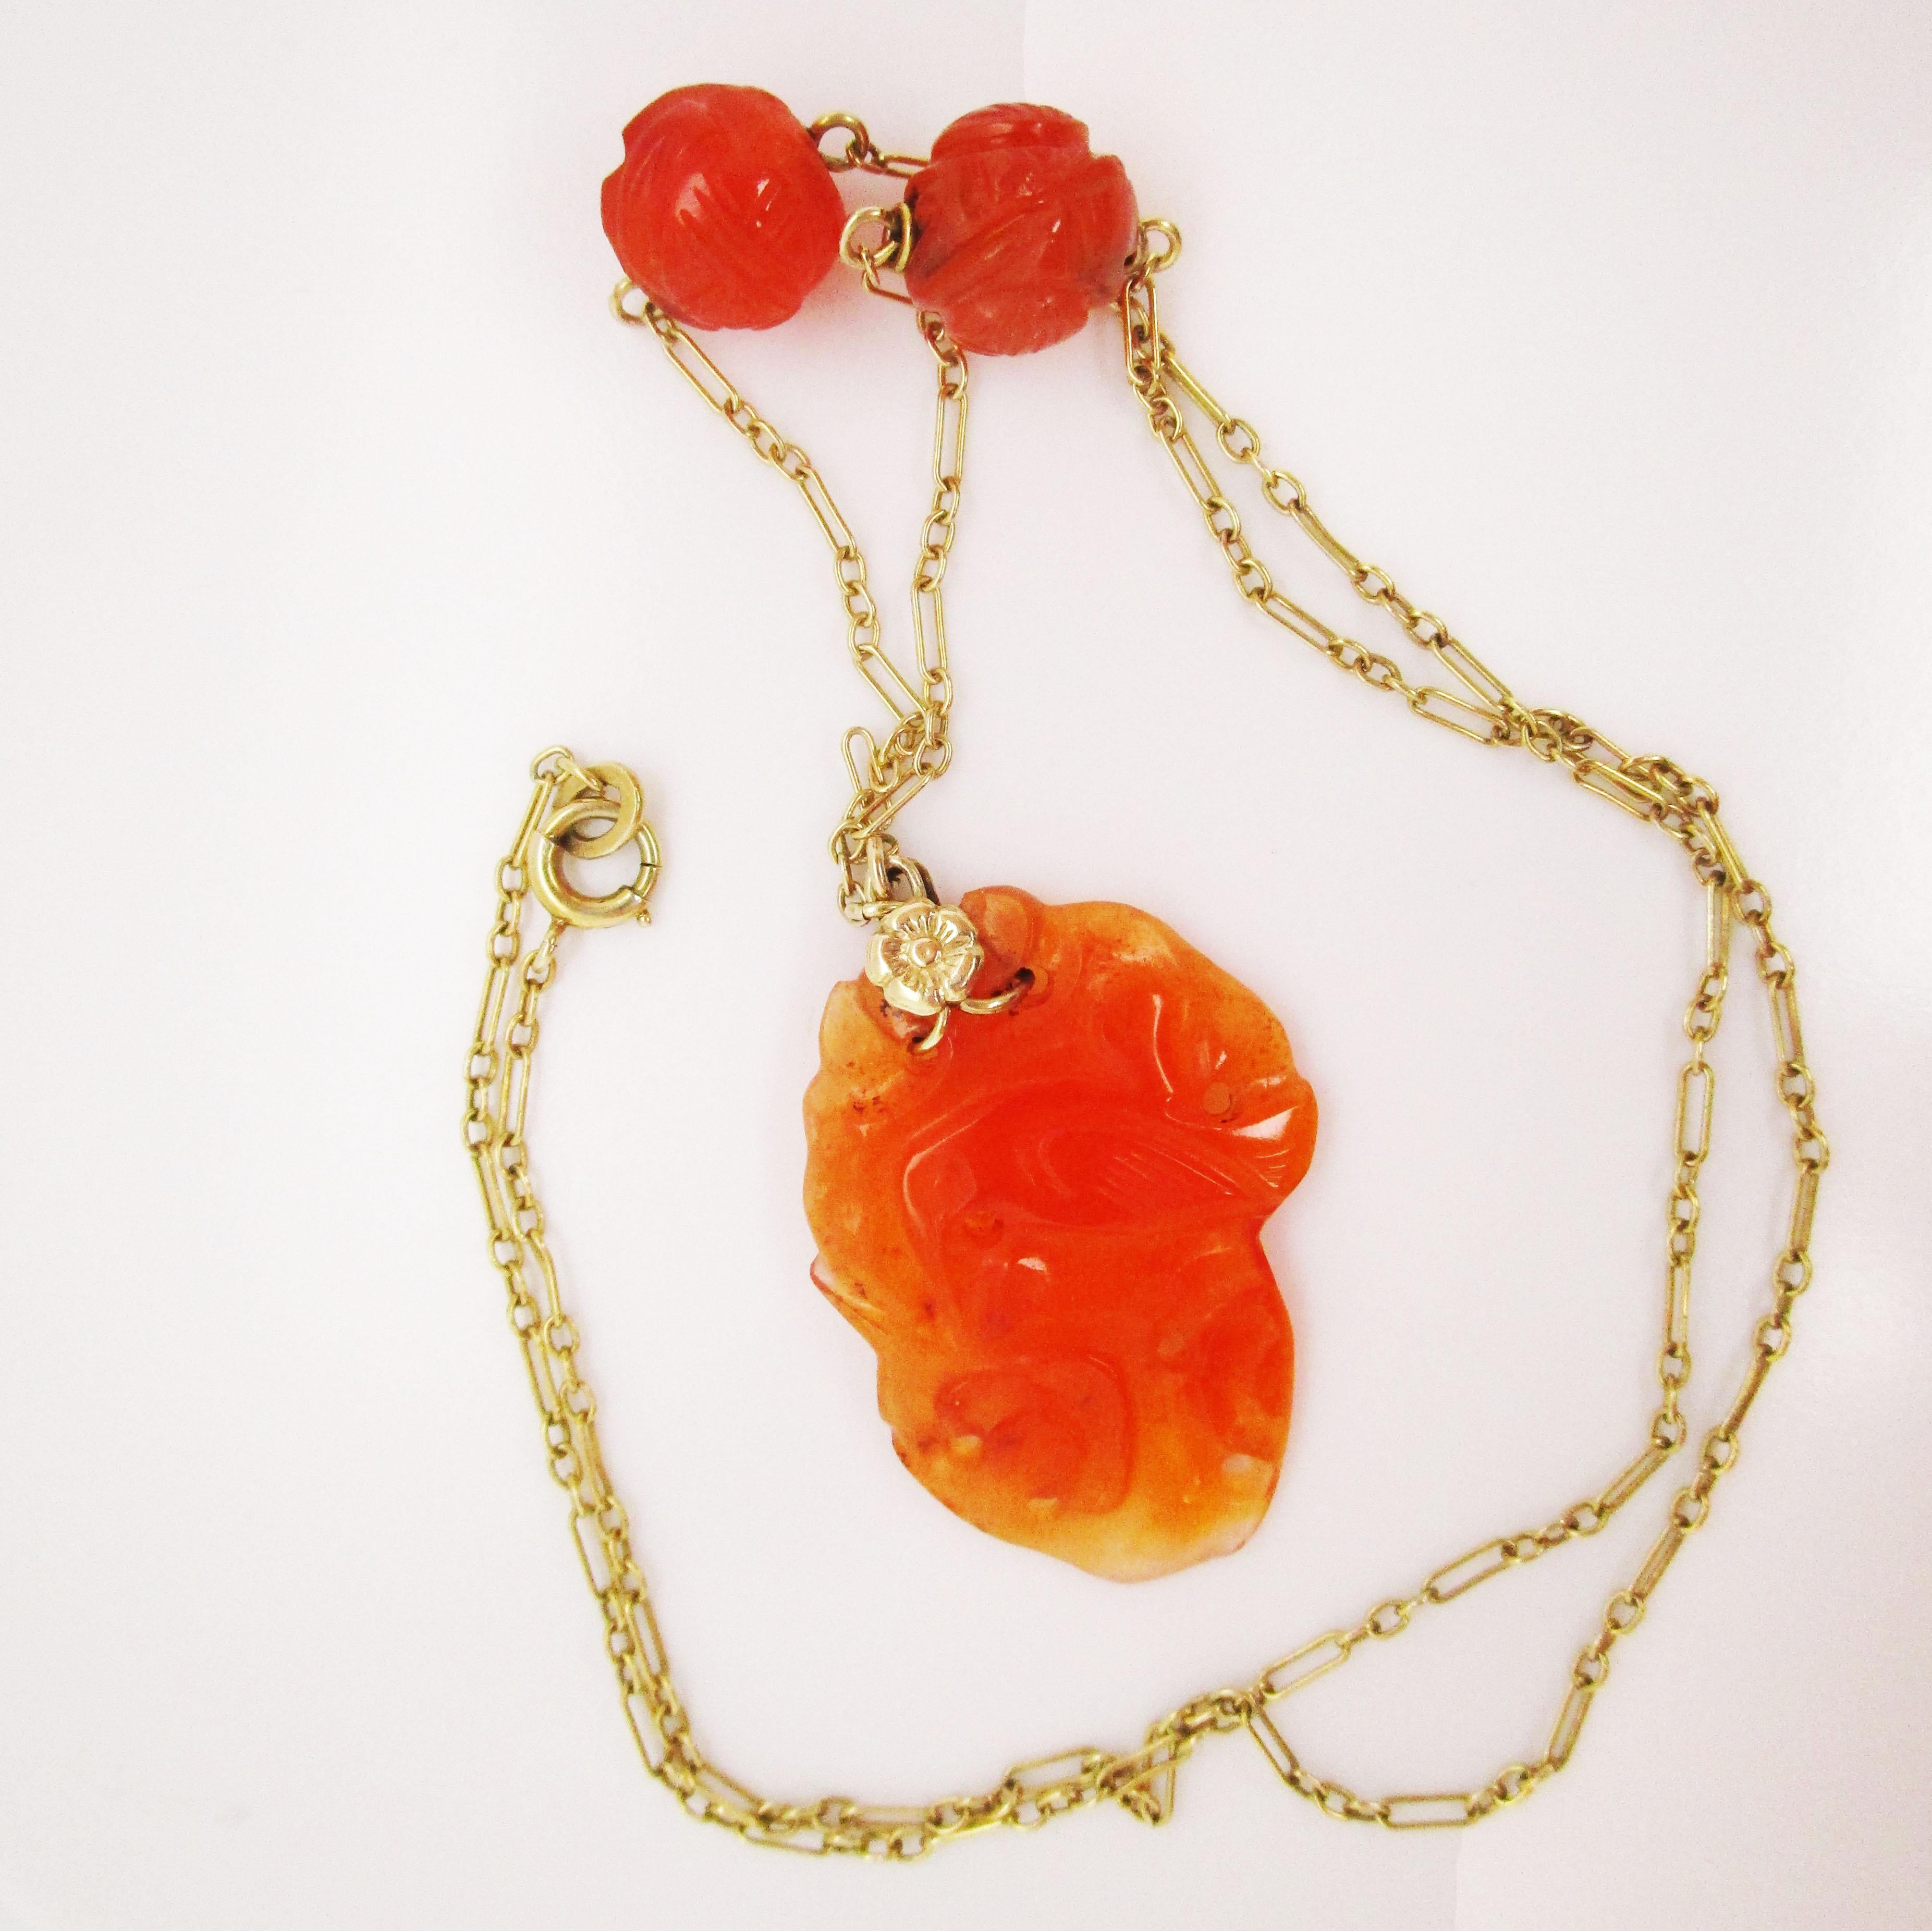 This stunning necklace is a fantastic example of Art Deco from 1920 and features a lovely combination of 14k green gold and rich orange carved carnelian. The center of the necklace is a carved carnelian with a fascinating asymmetrical shape with an